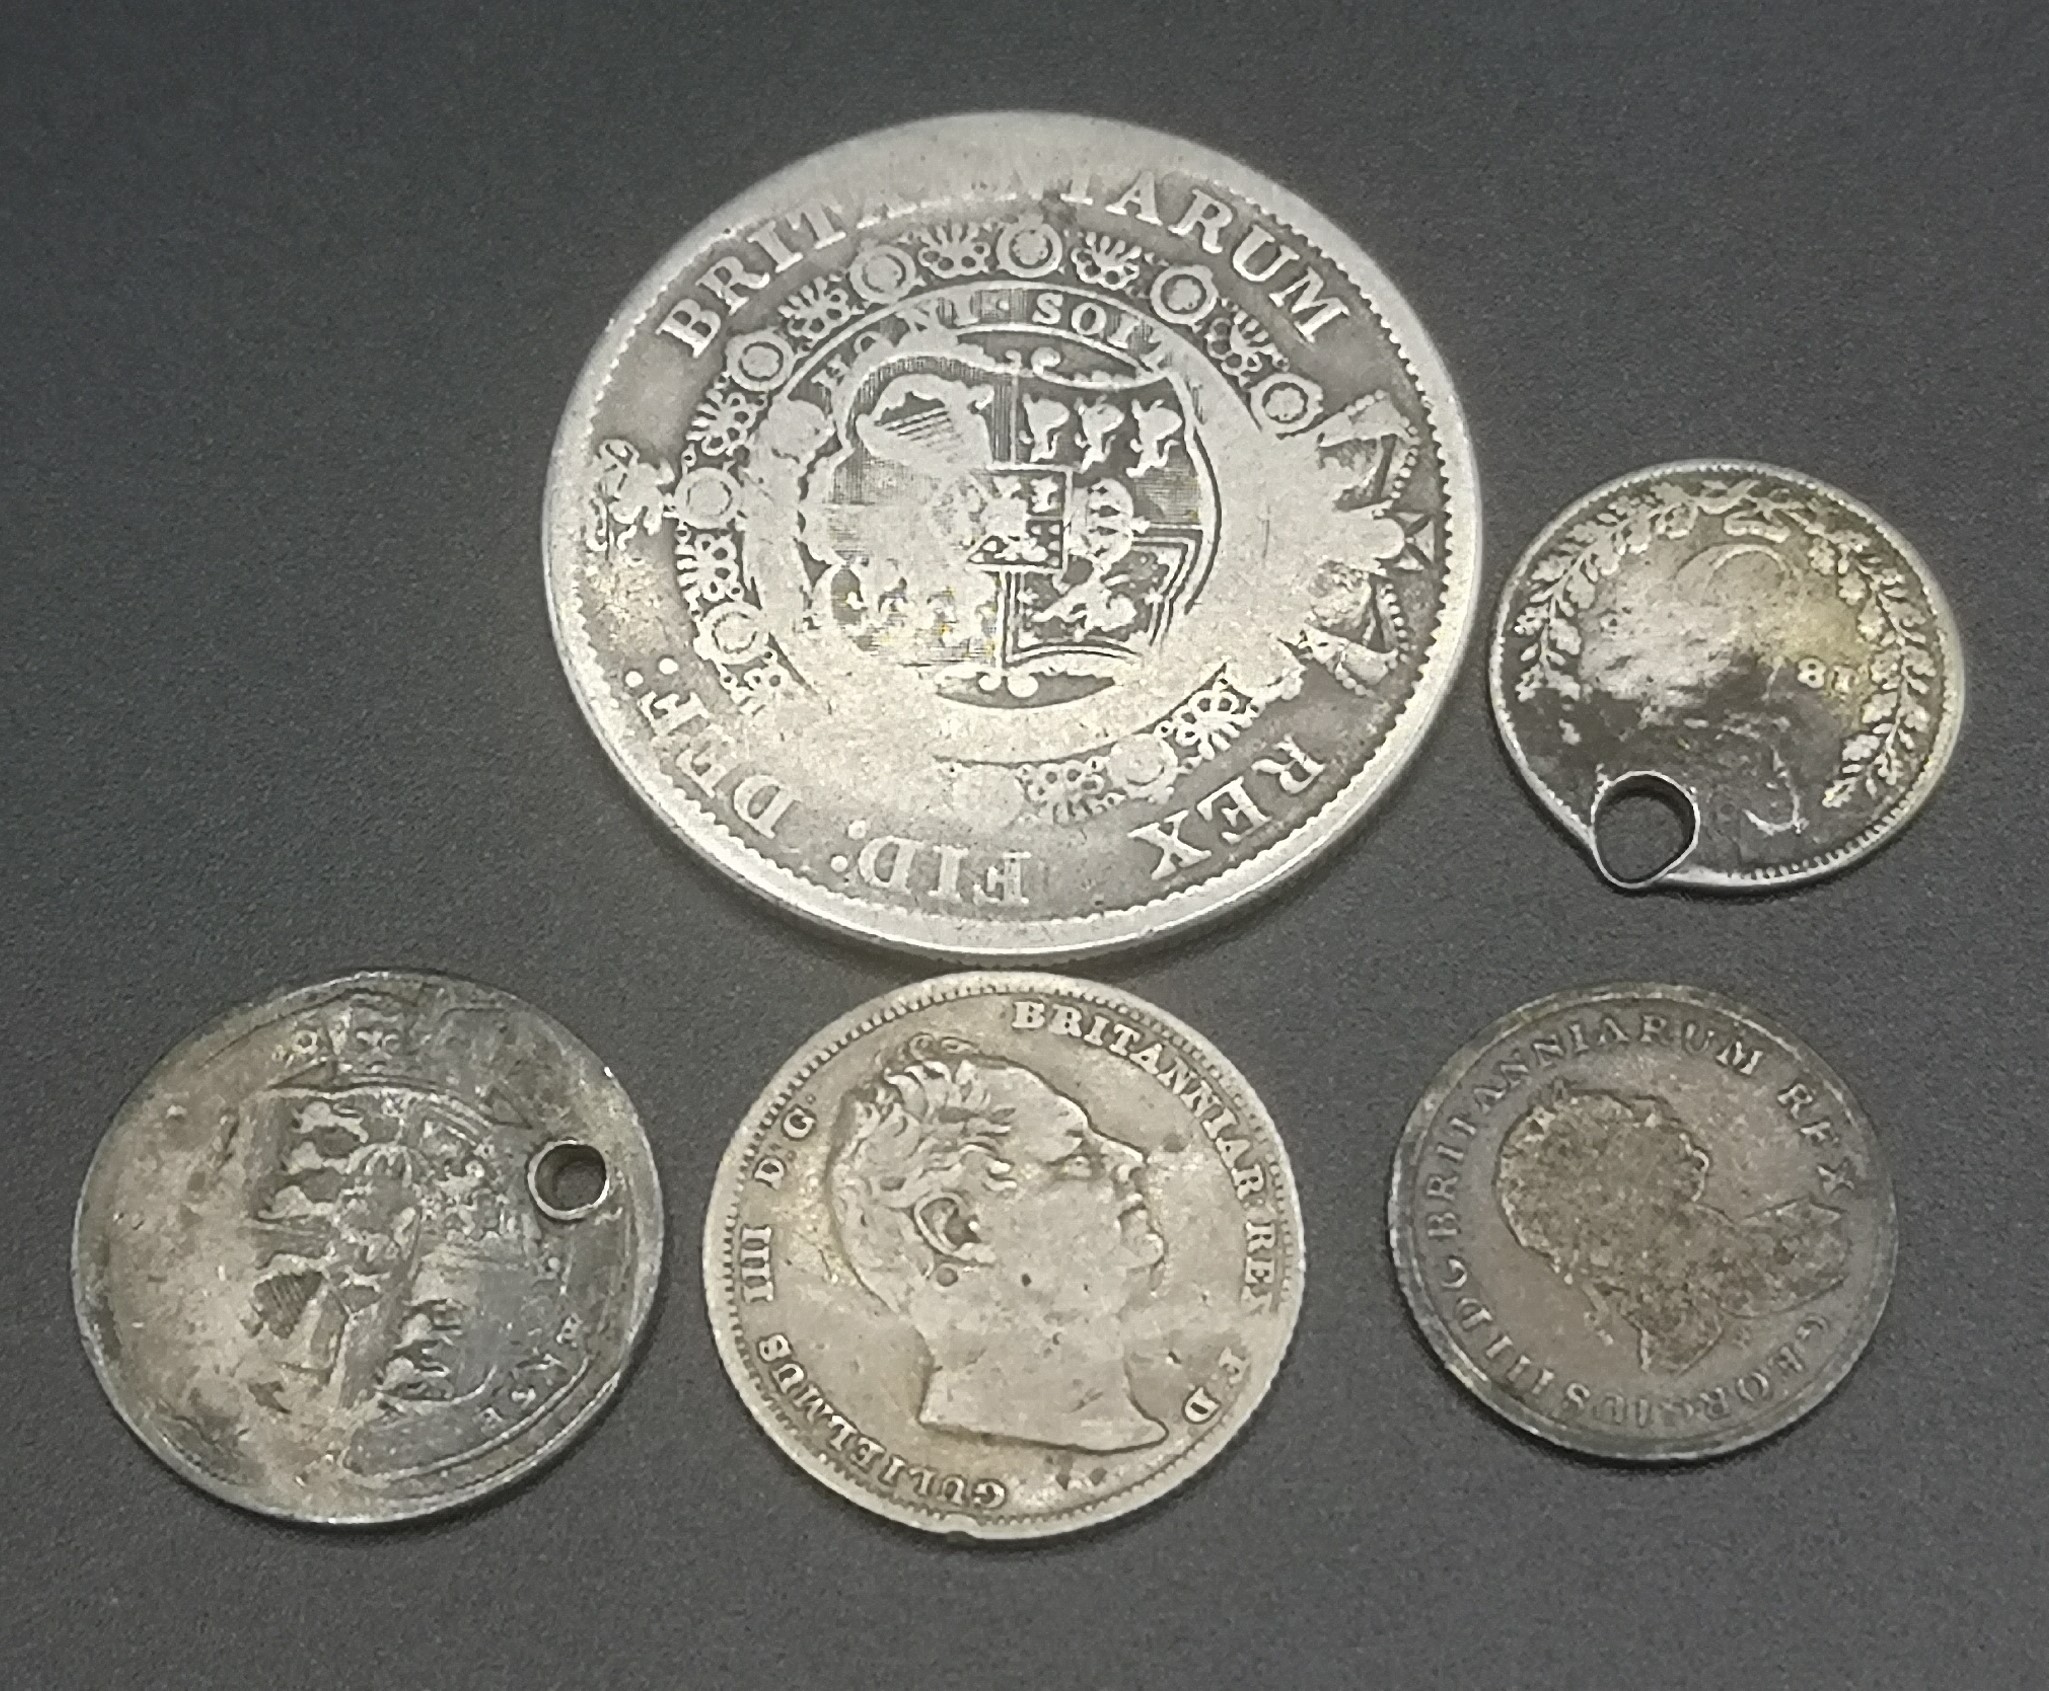 Three King George III coins and two King George IV - Image 7 of 7